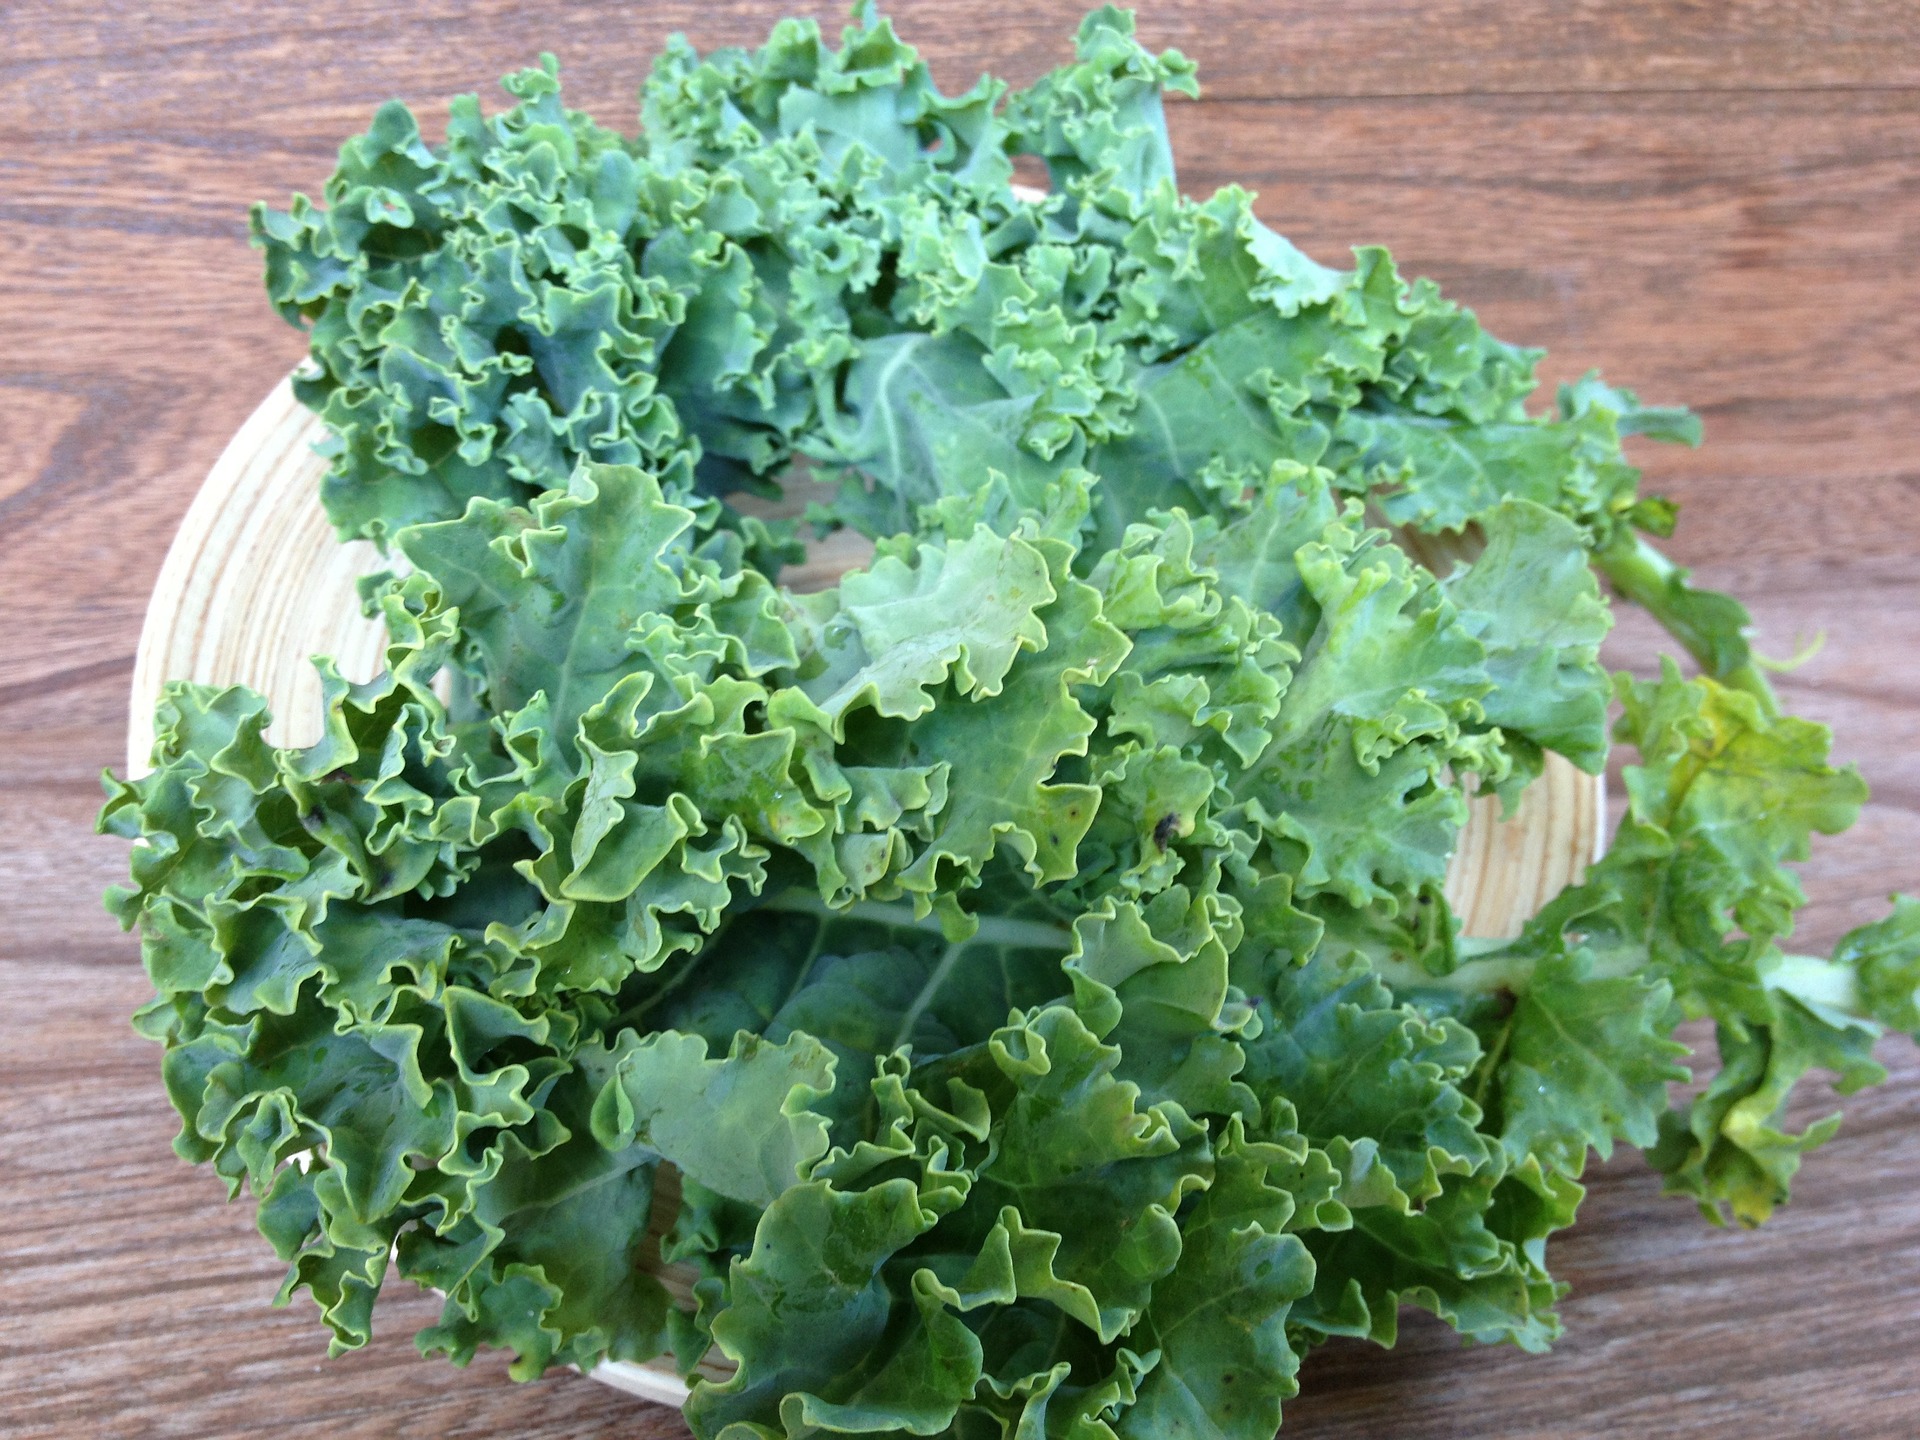 What Are The Benefits Of Kale Greens? - Seed Supplements